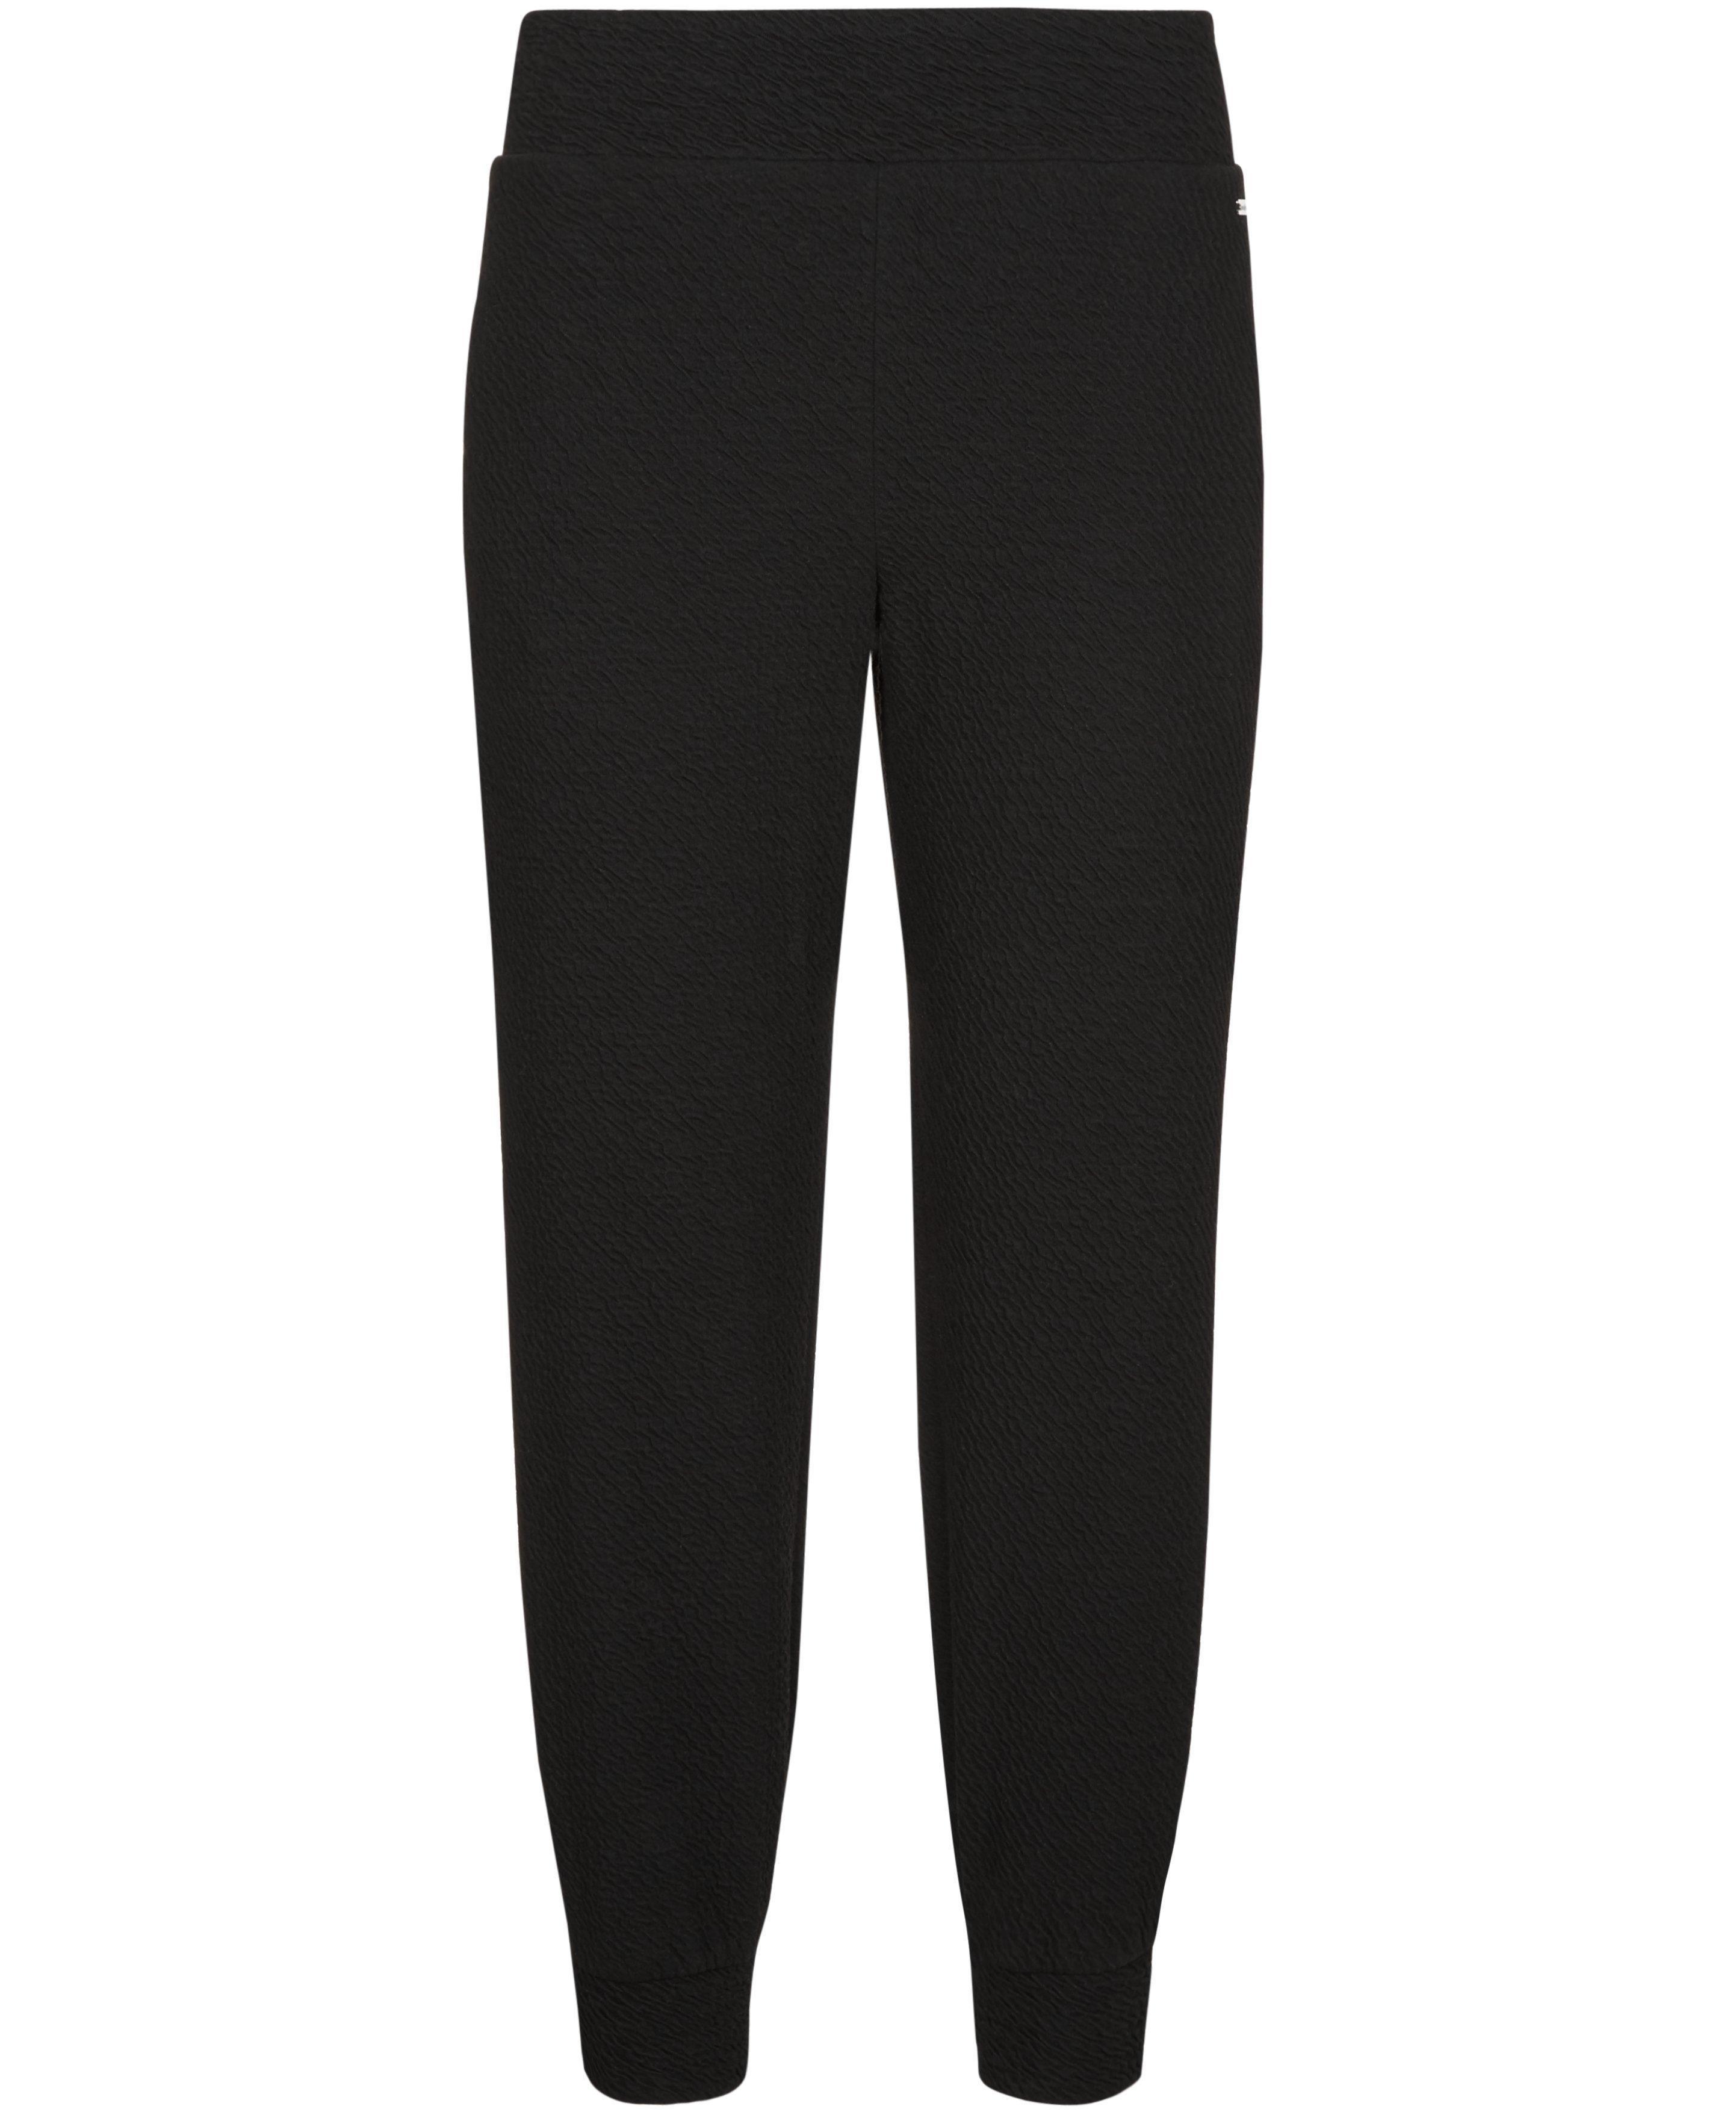 Sweaty Betty Connect Cuffed 7/8 Track Pants in Black - Lyst